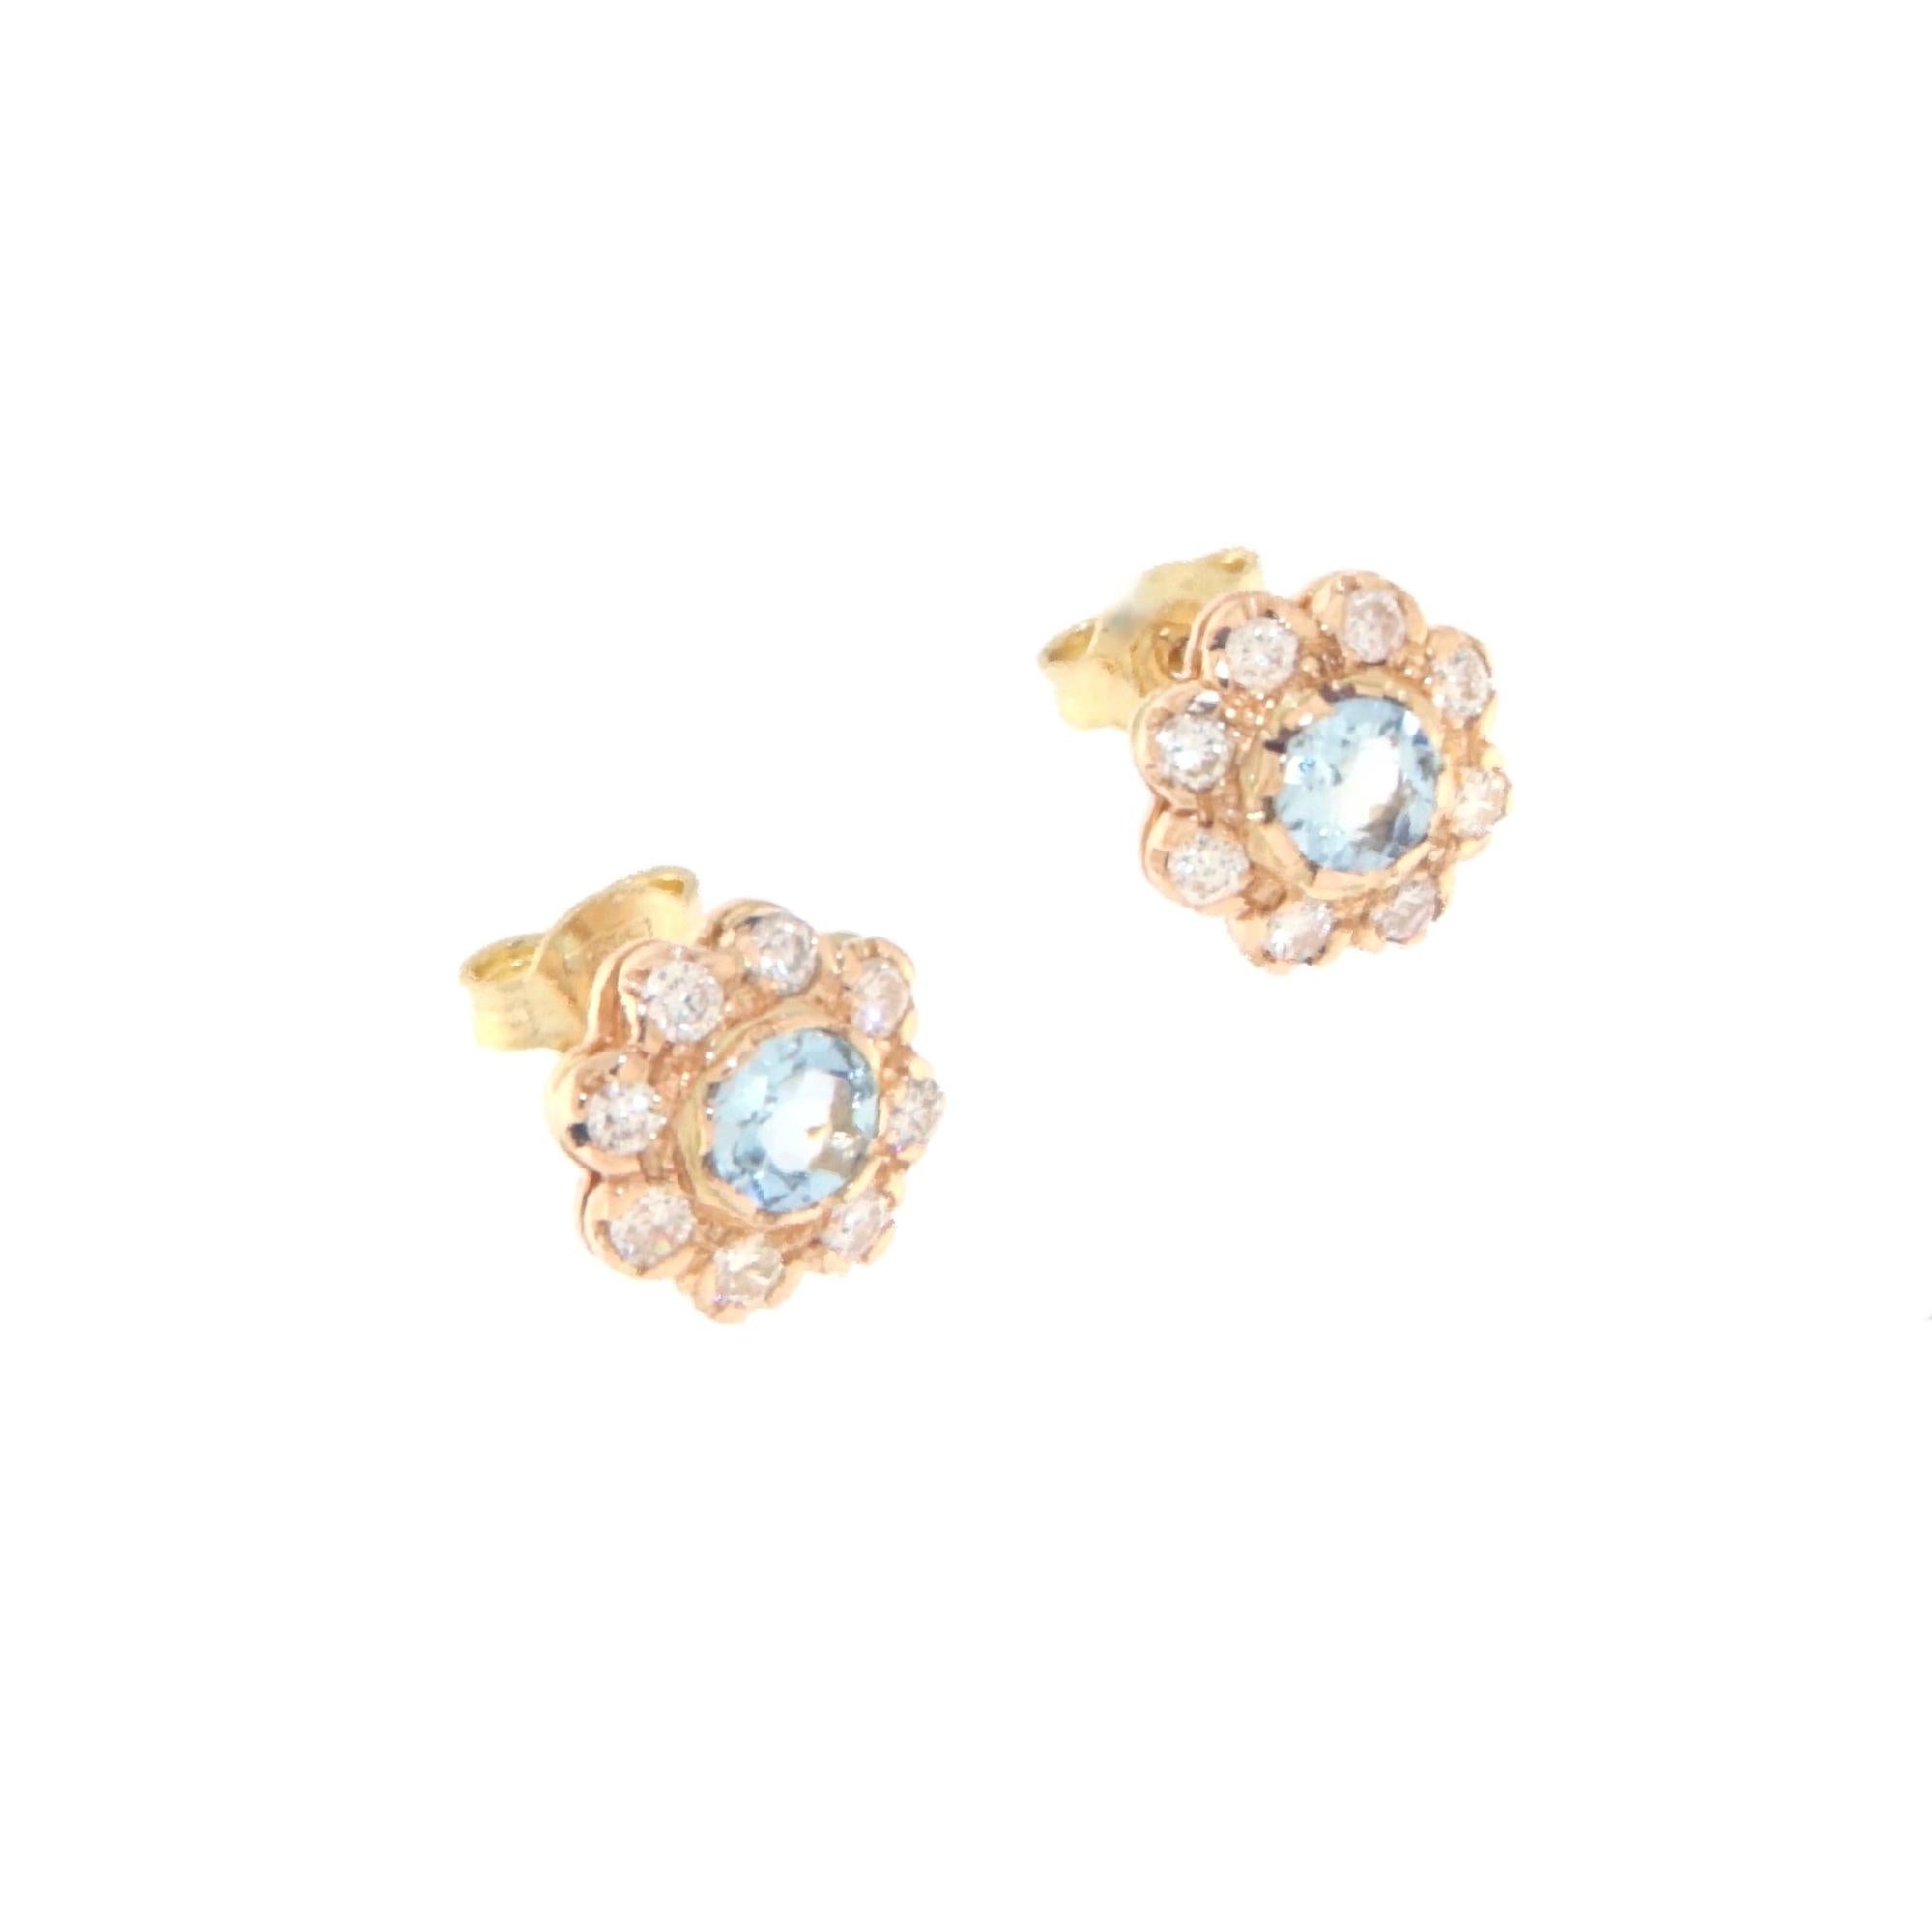 These refined stud earrings, crafted in precious 14-karat yellow gold, are a celebration of elegance and brightness. At the center of each earring, a central aquamarine, chosen for its clear blue hue and crystal purity, evokes the calm and serenity